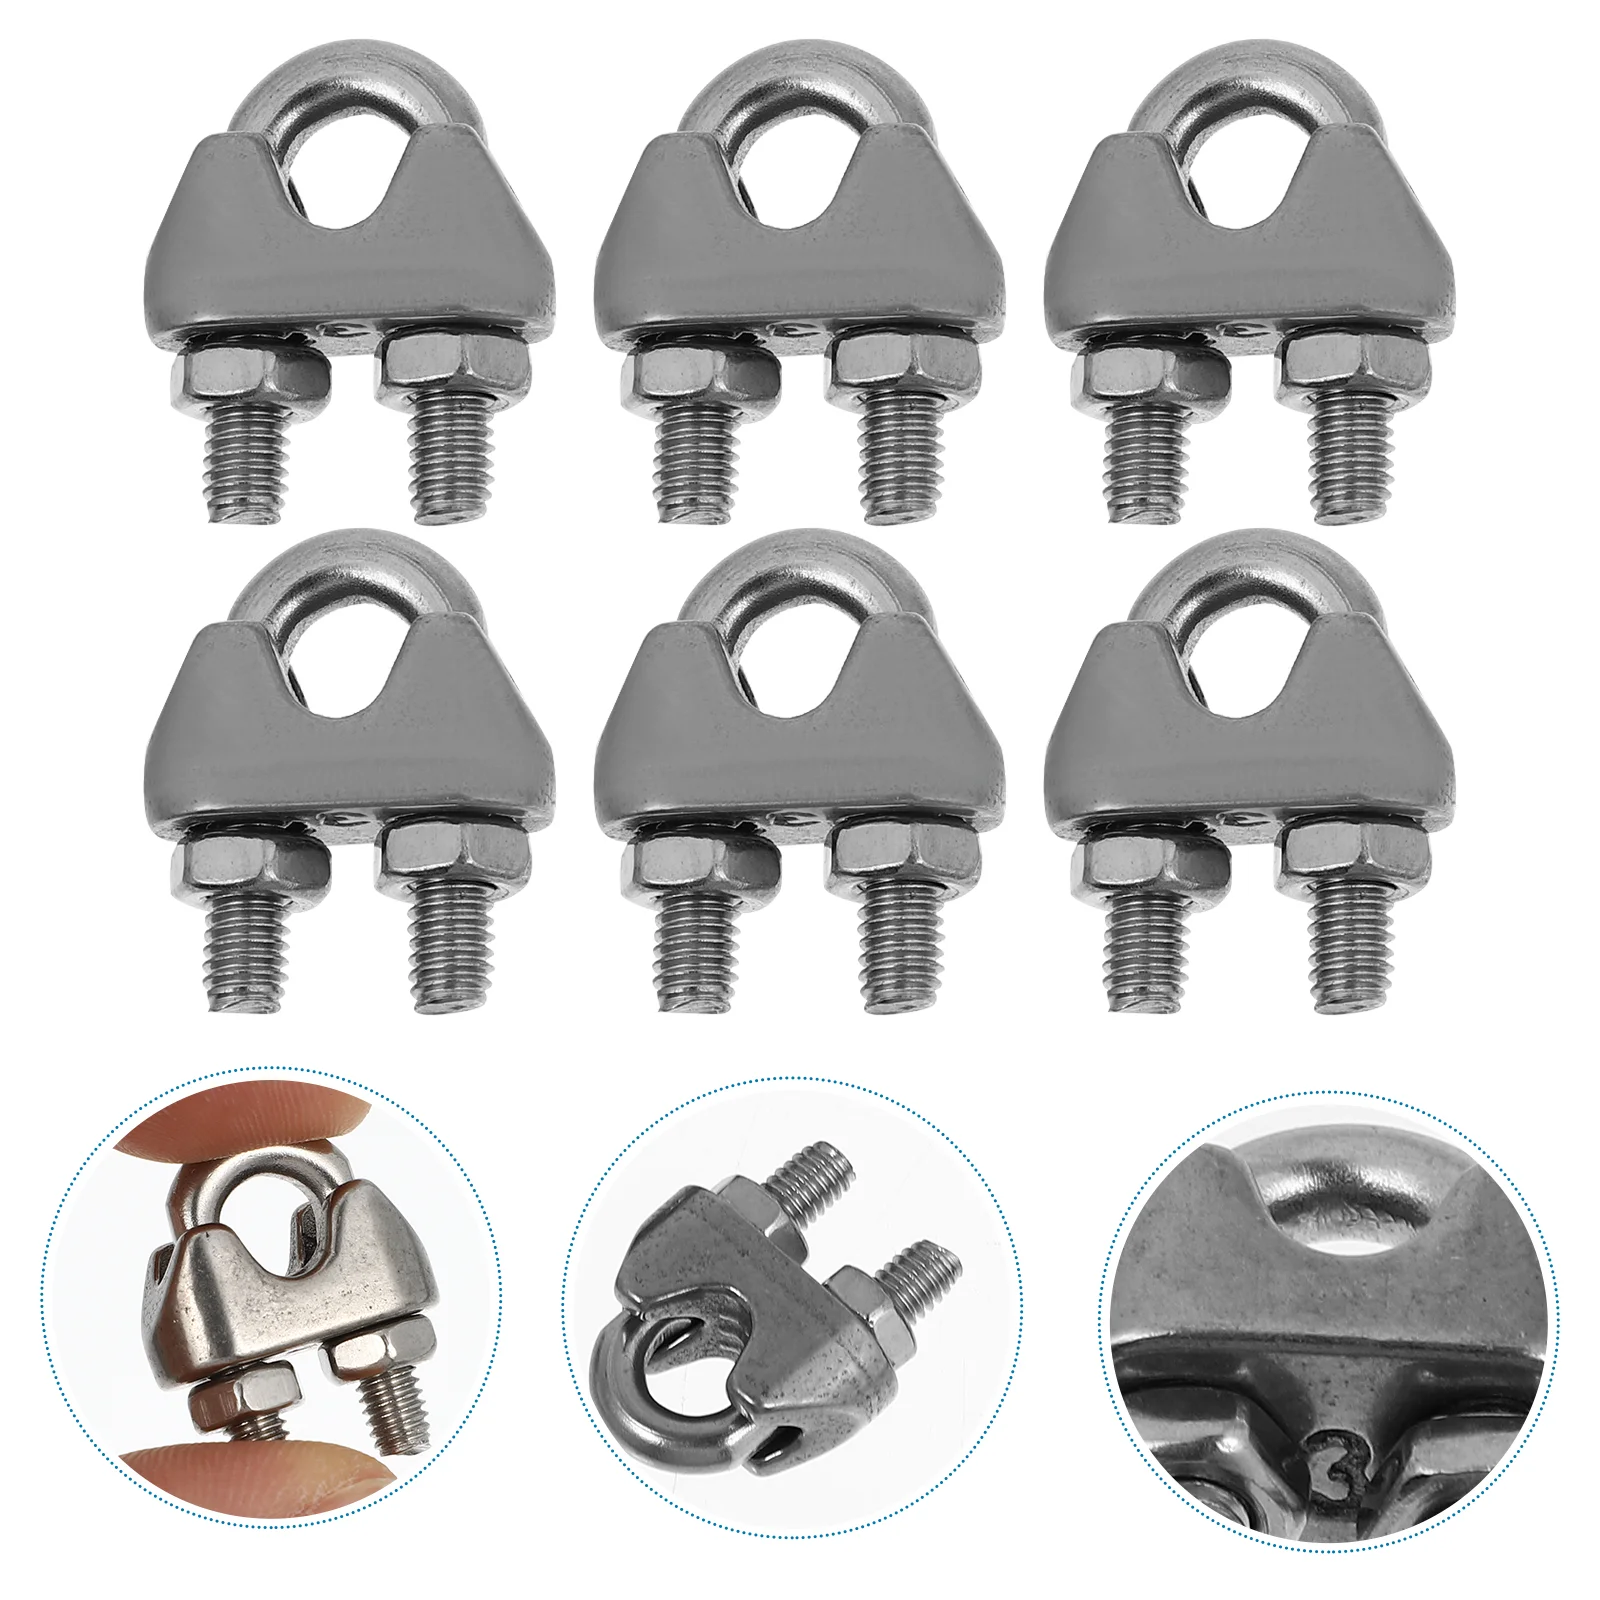 

10 Pcs Wire Rope Chuck Clips Sturdy Clamps Rigging Hardwares U-type Cable Stainless Steel Ropes Accessories Bolts